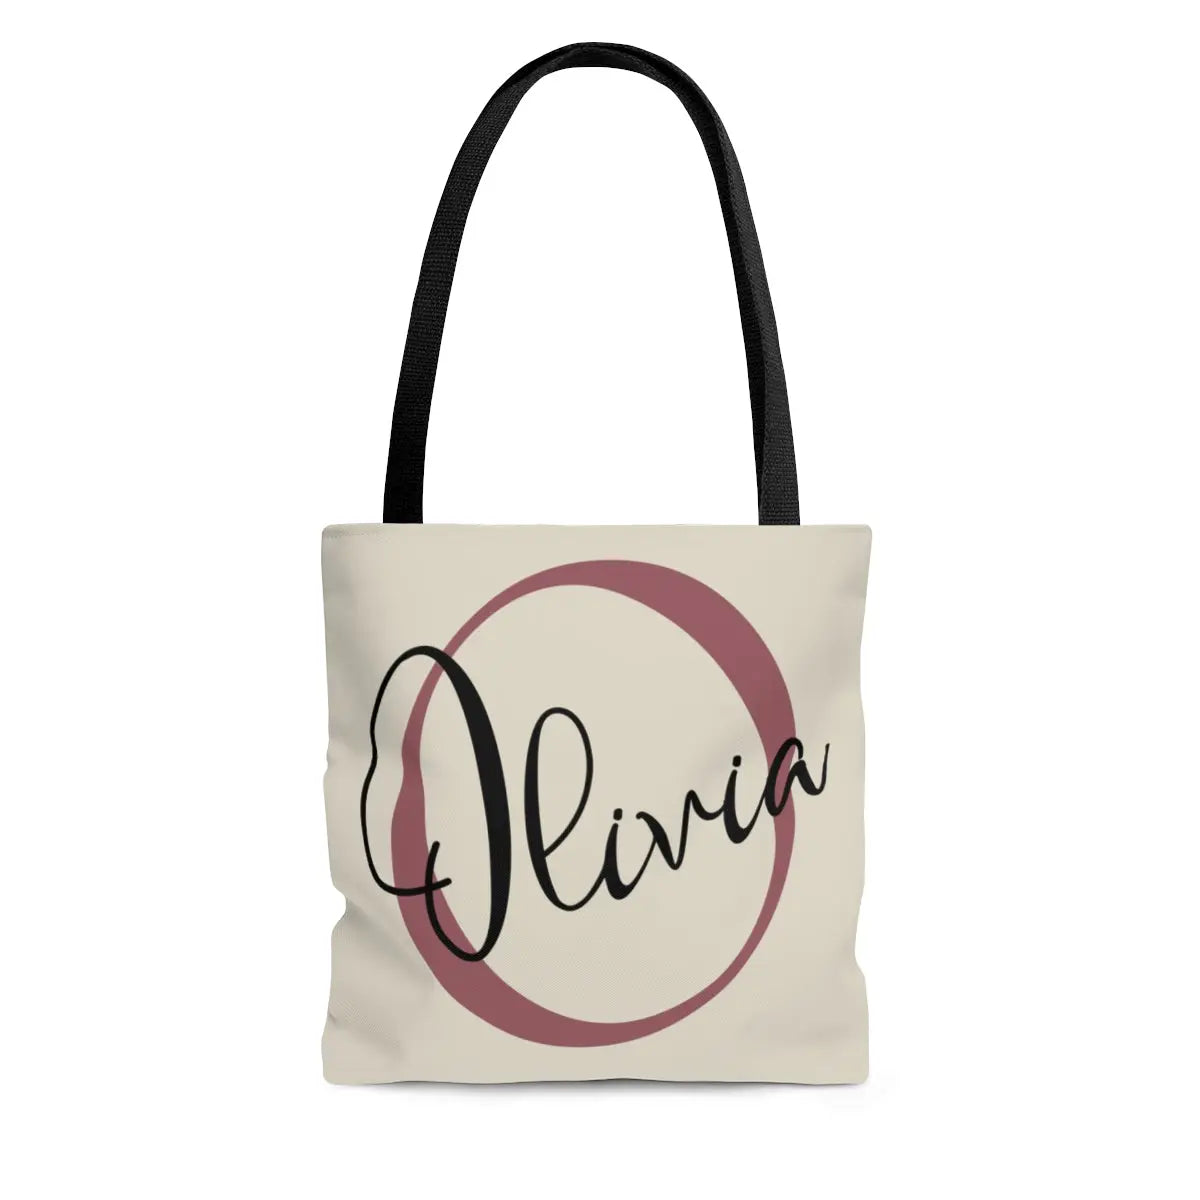 Bridal Party Gift Monogram Tote Bag Wedding Party Tote Bags 